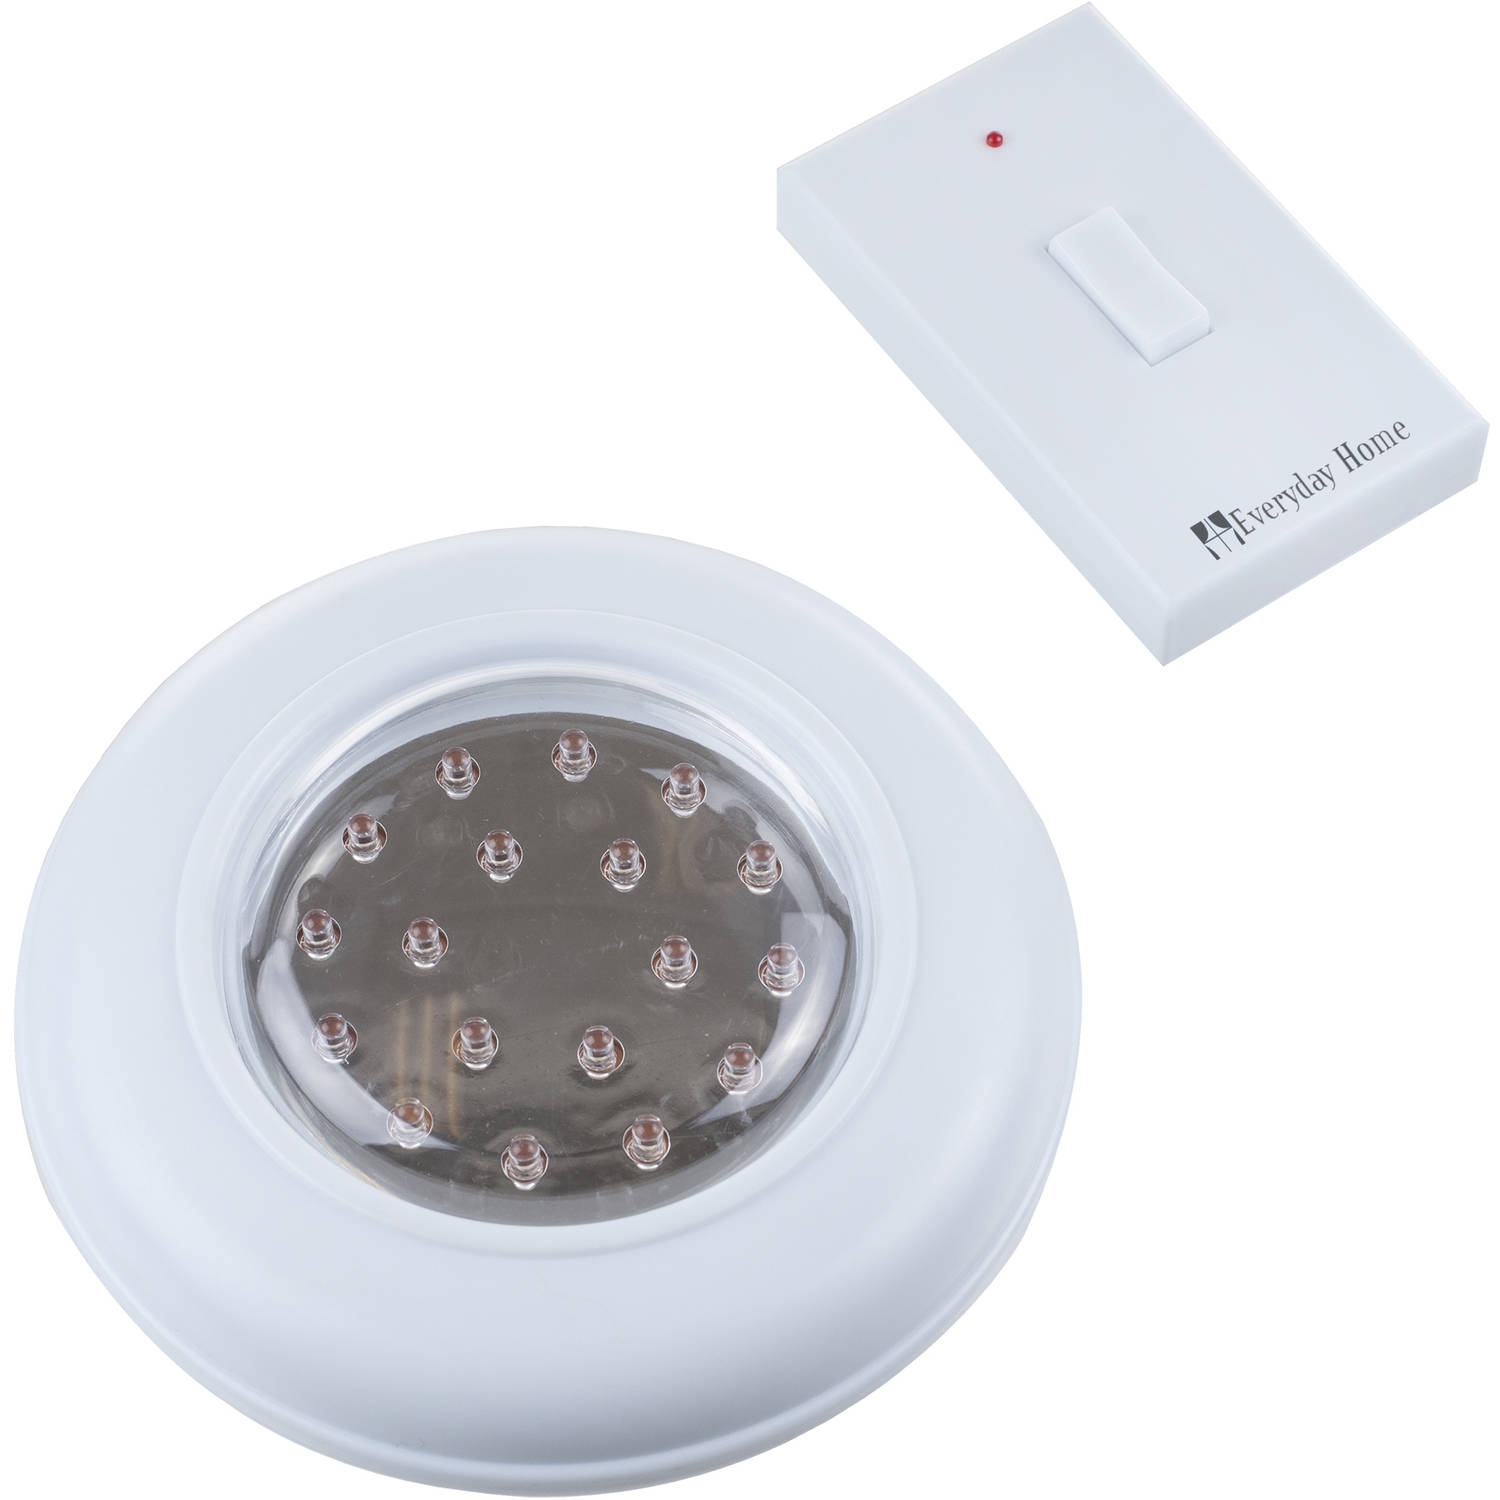 Permalink to Cordless Electric Ceiling Light With Remote